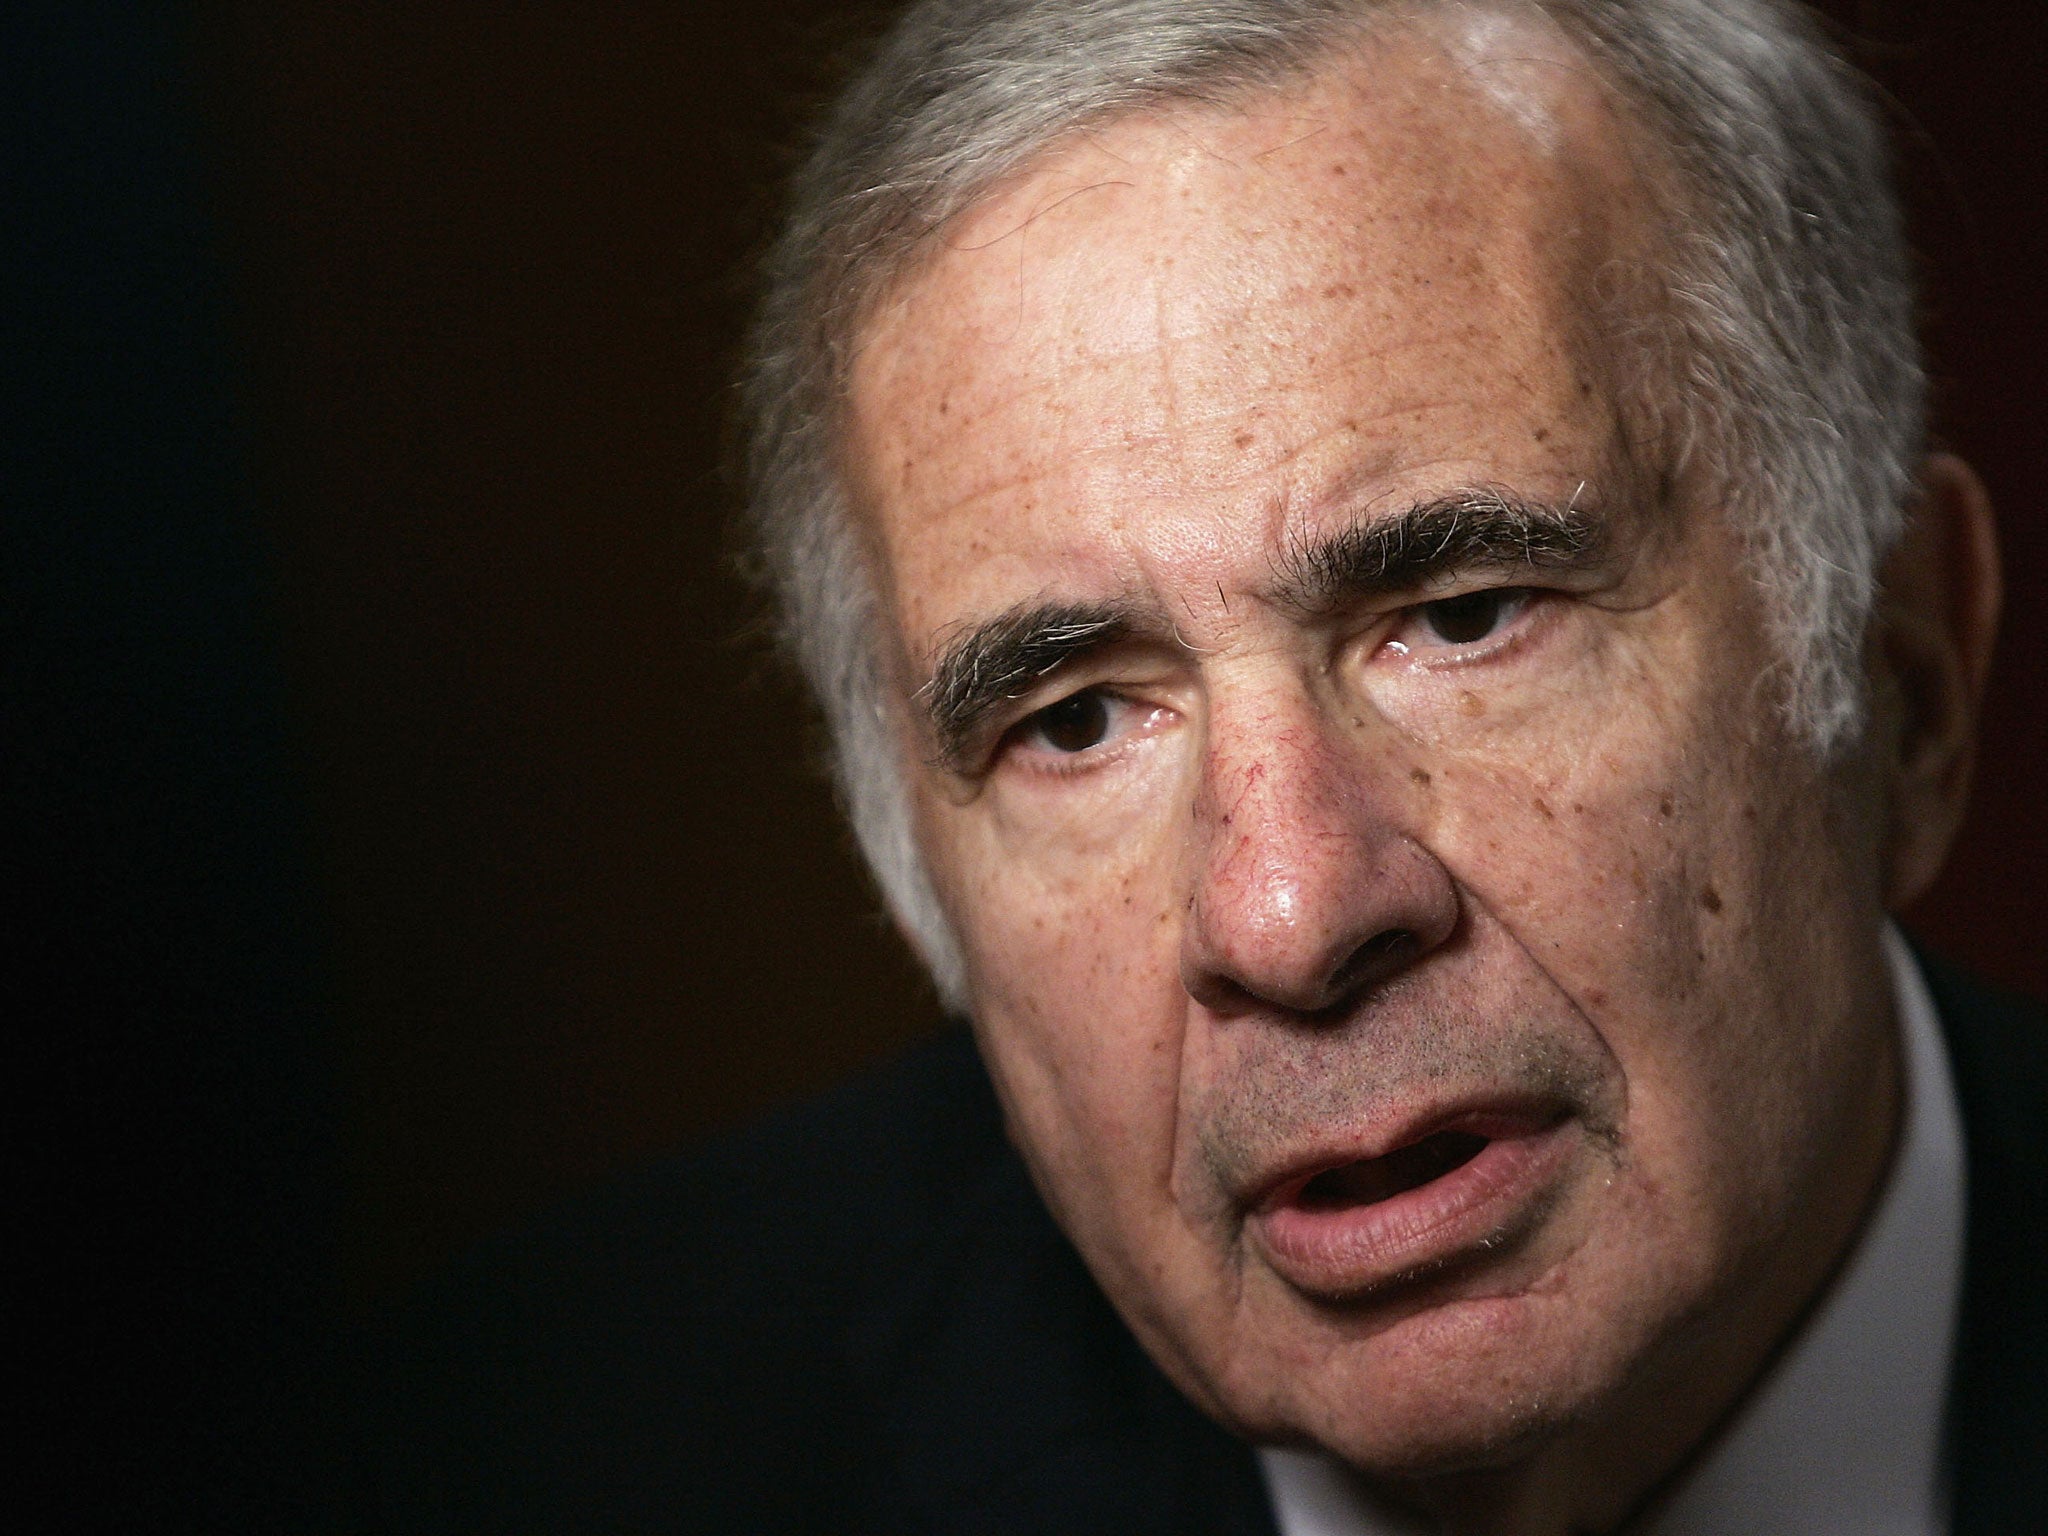 Icahn, who acquired a stake in Apple in 2013, has been one of Apple’s most vocal investors